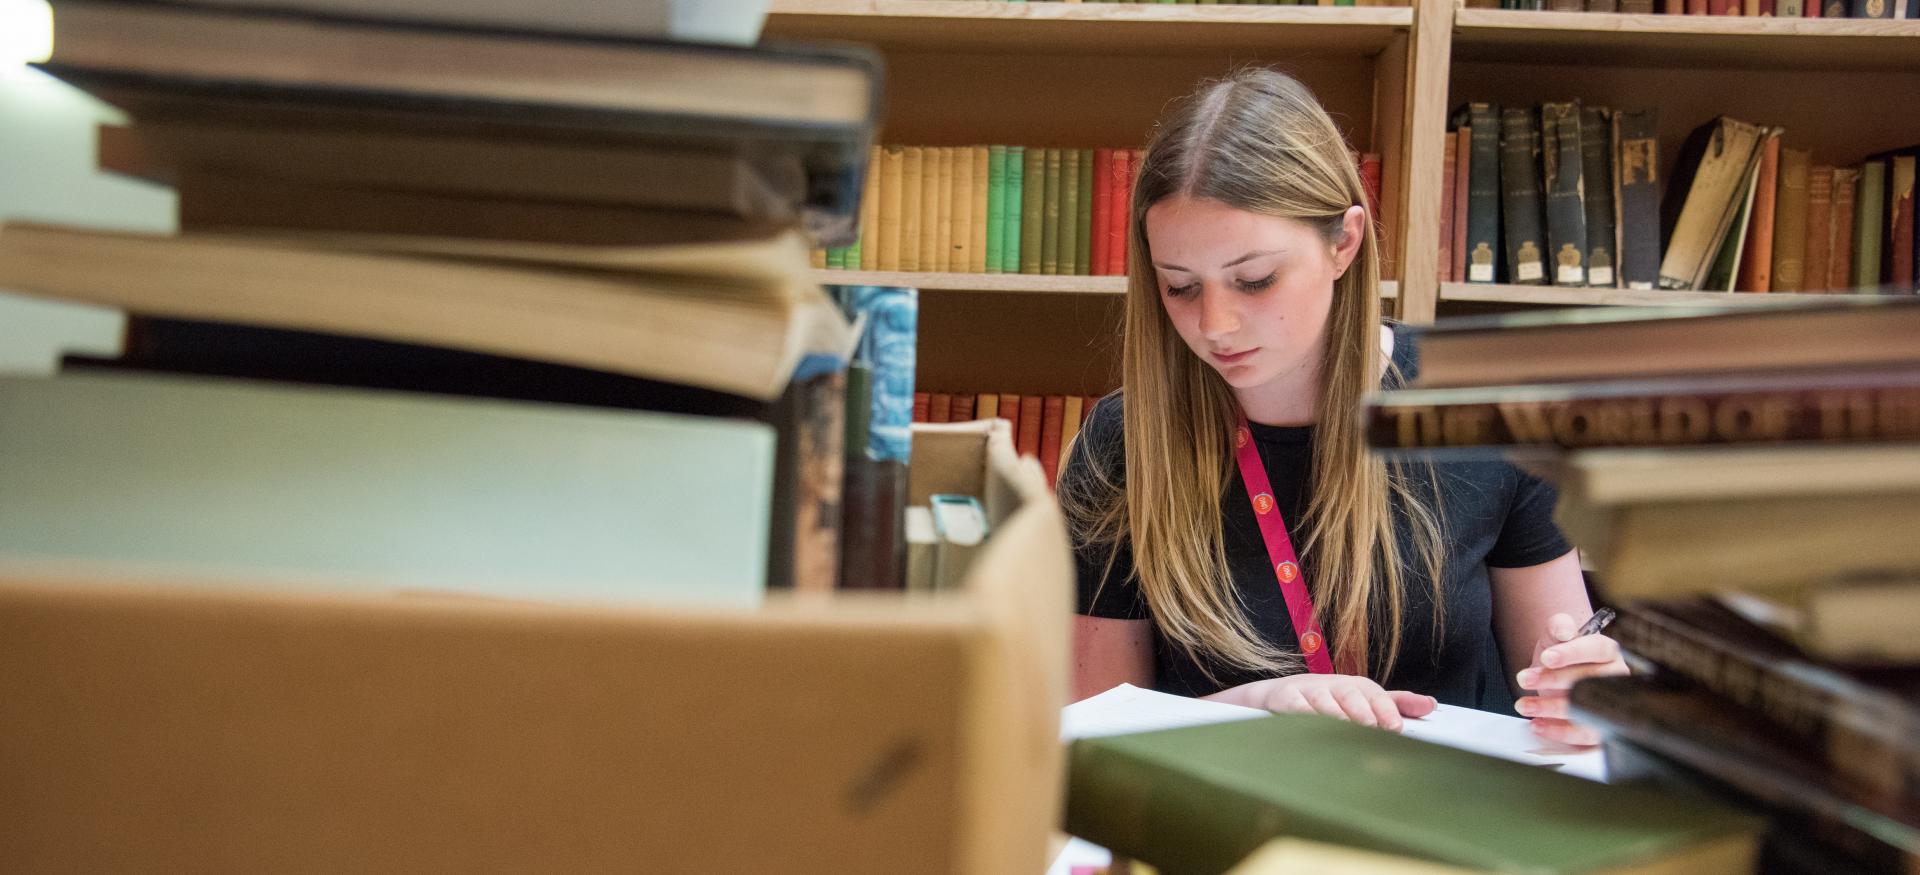 A student studies among a pile of books and folders with a bookshelf in the background.